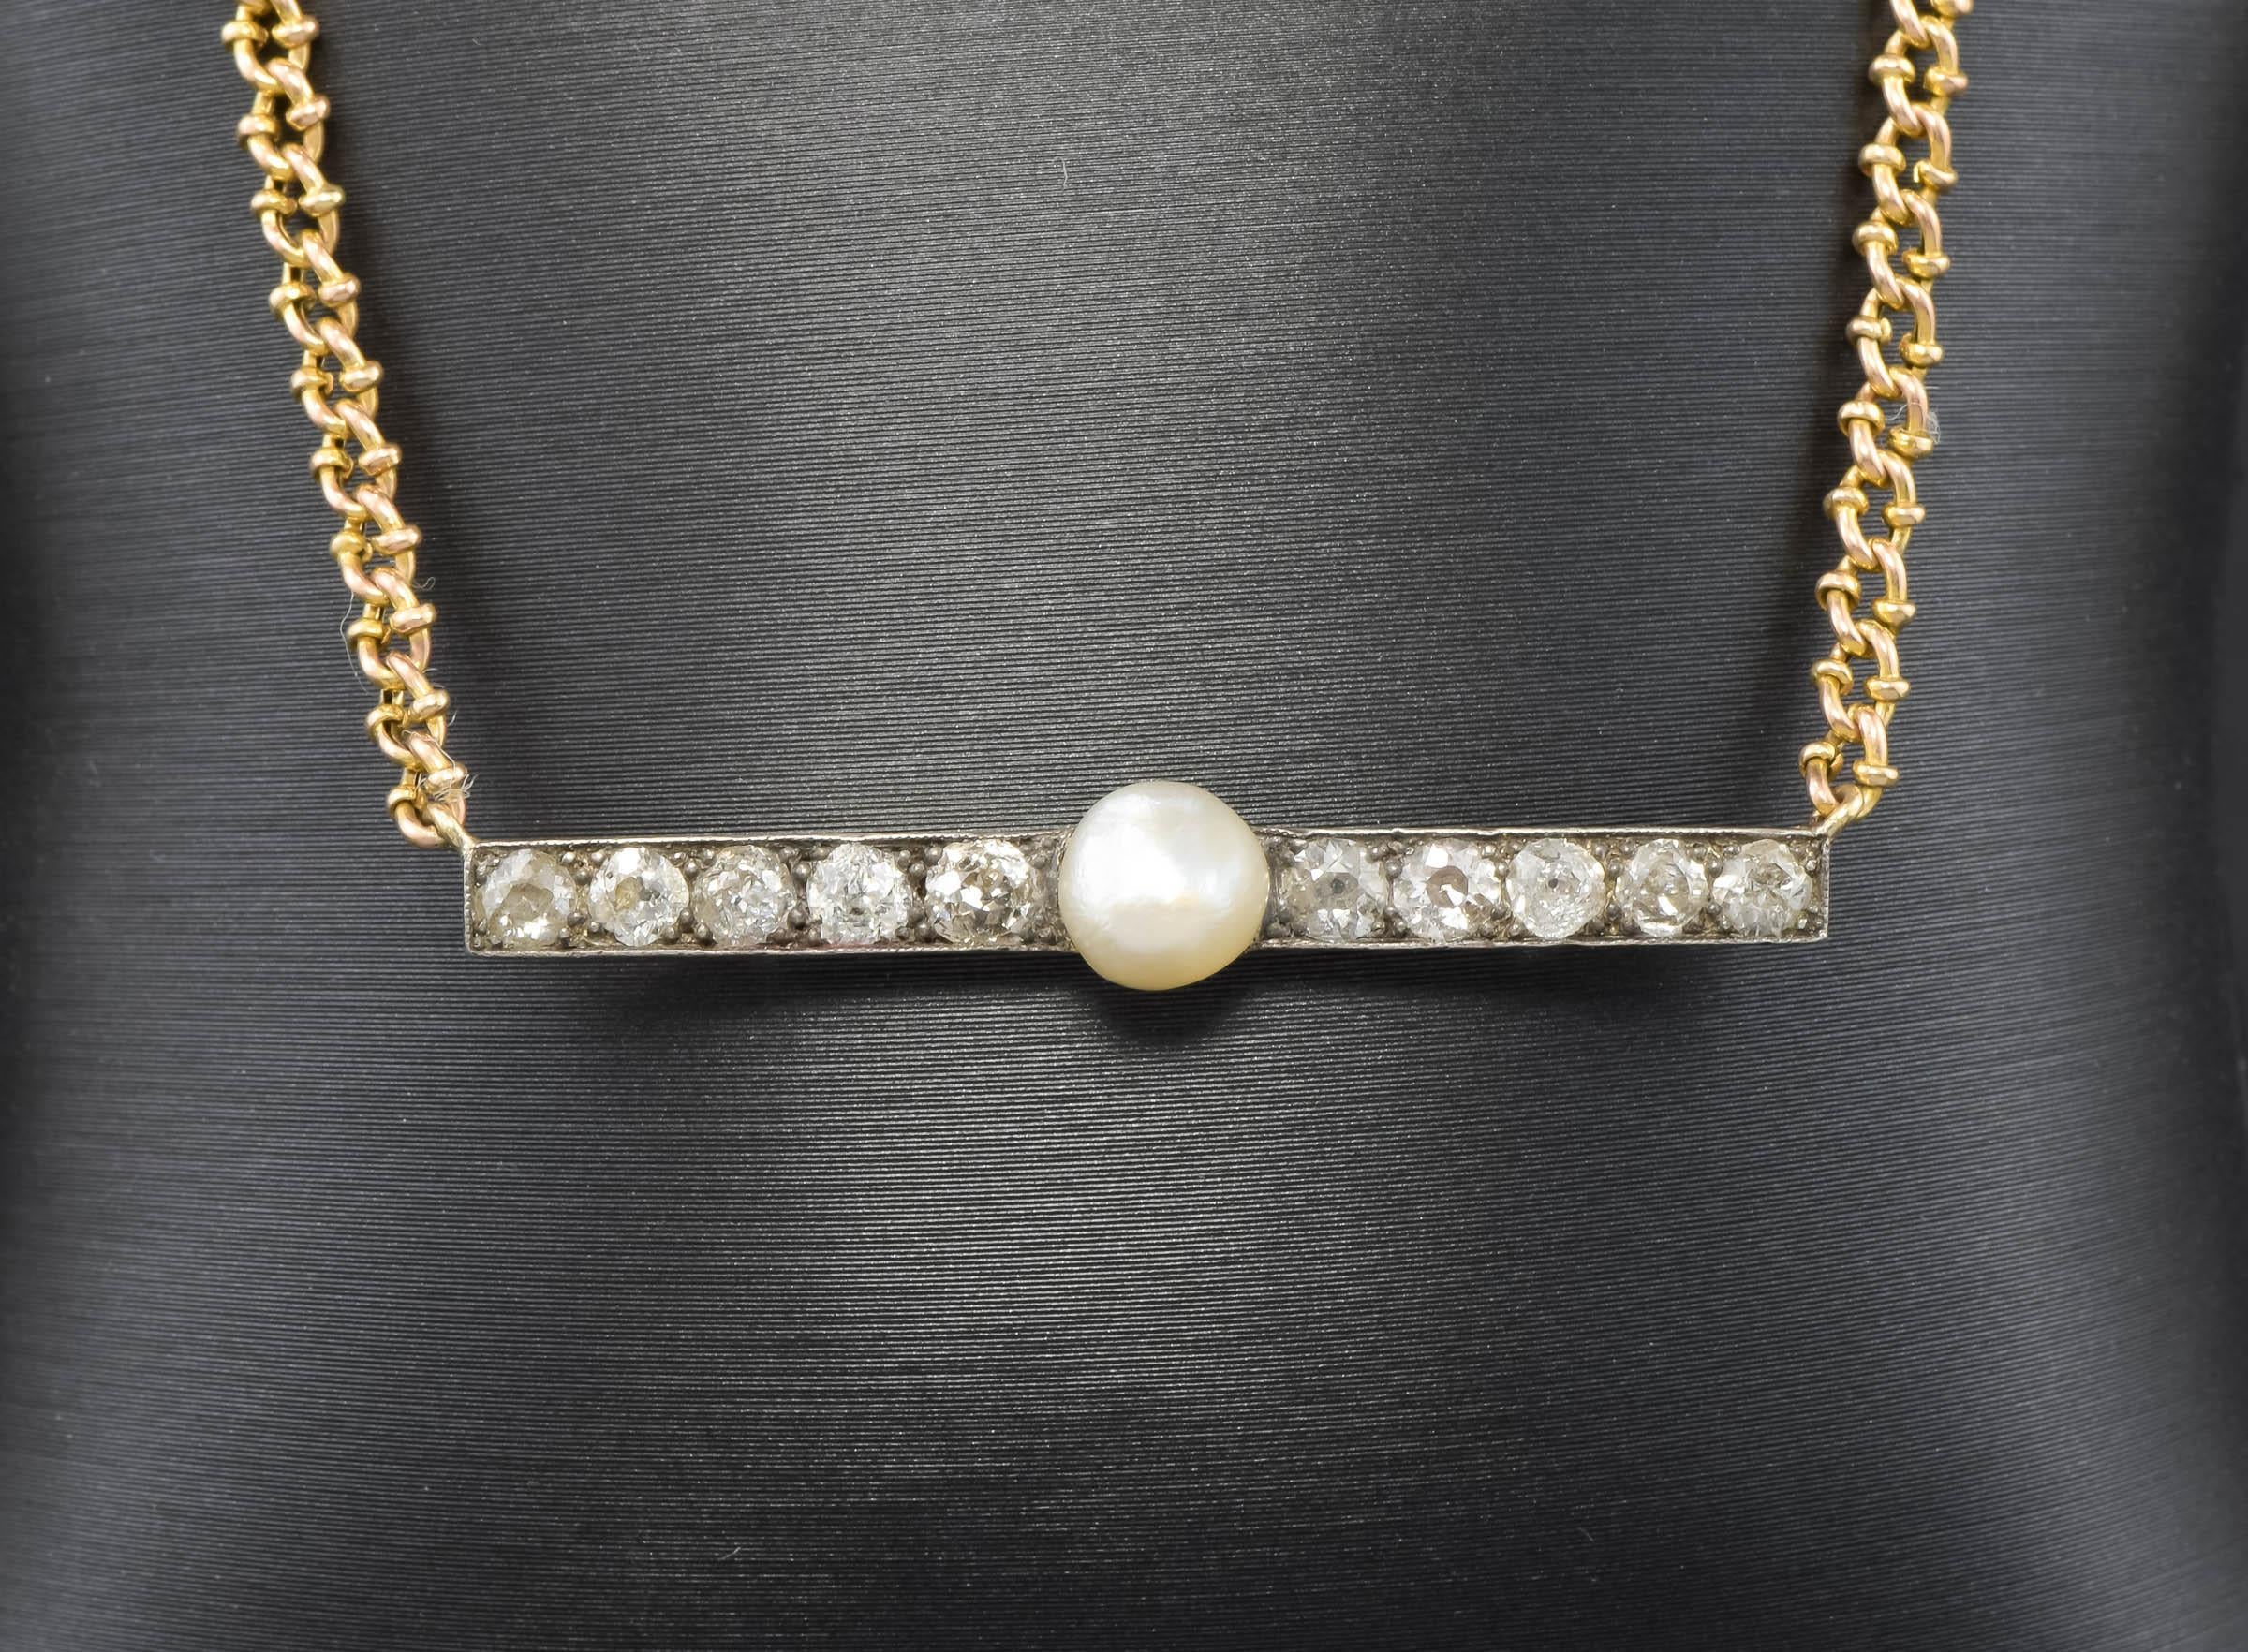 A gorgeous antique fancy link chain combined with a Victorian period diamond bar with central pearl - this is an antique conversion necklace. I found the chain long ago and waited to find a bar brooch I loved enough to pair with it.

The